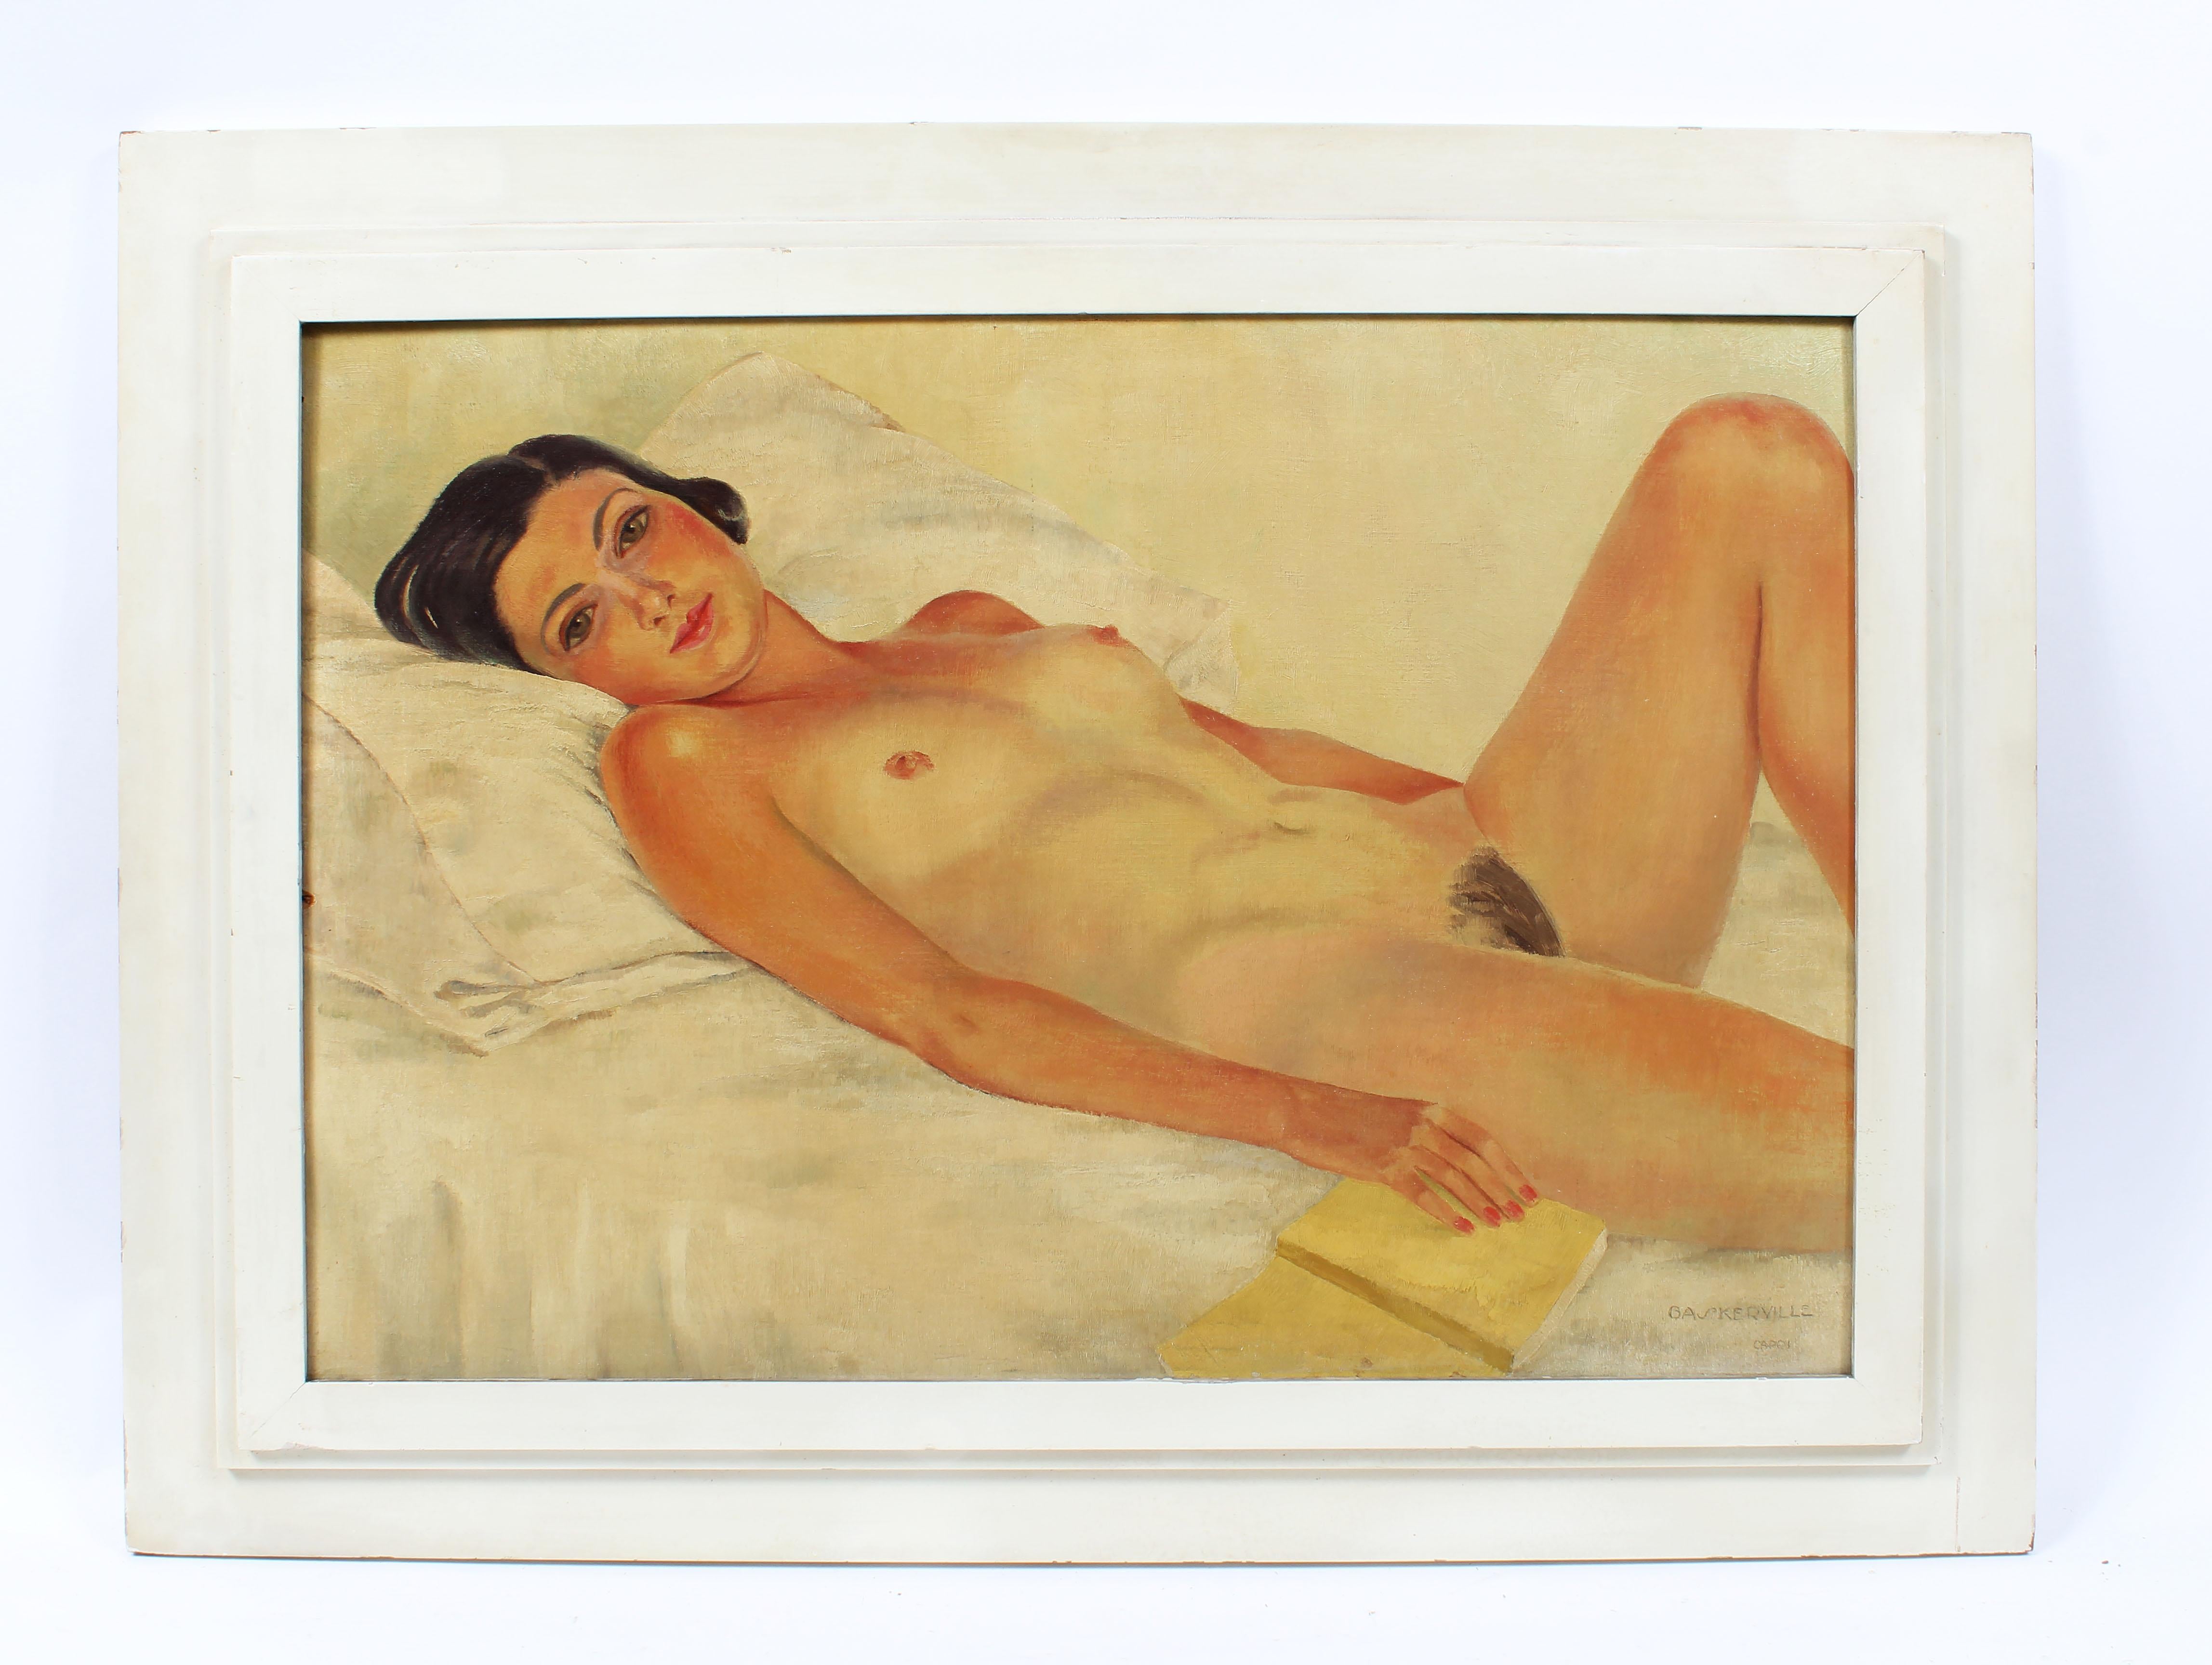 Charles Baskerville Jr. Nude Painting - Reclining Nude, Female Portrait Oil Painting by Charles Baskerville Capri Italy